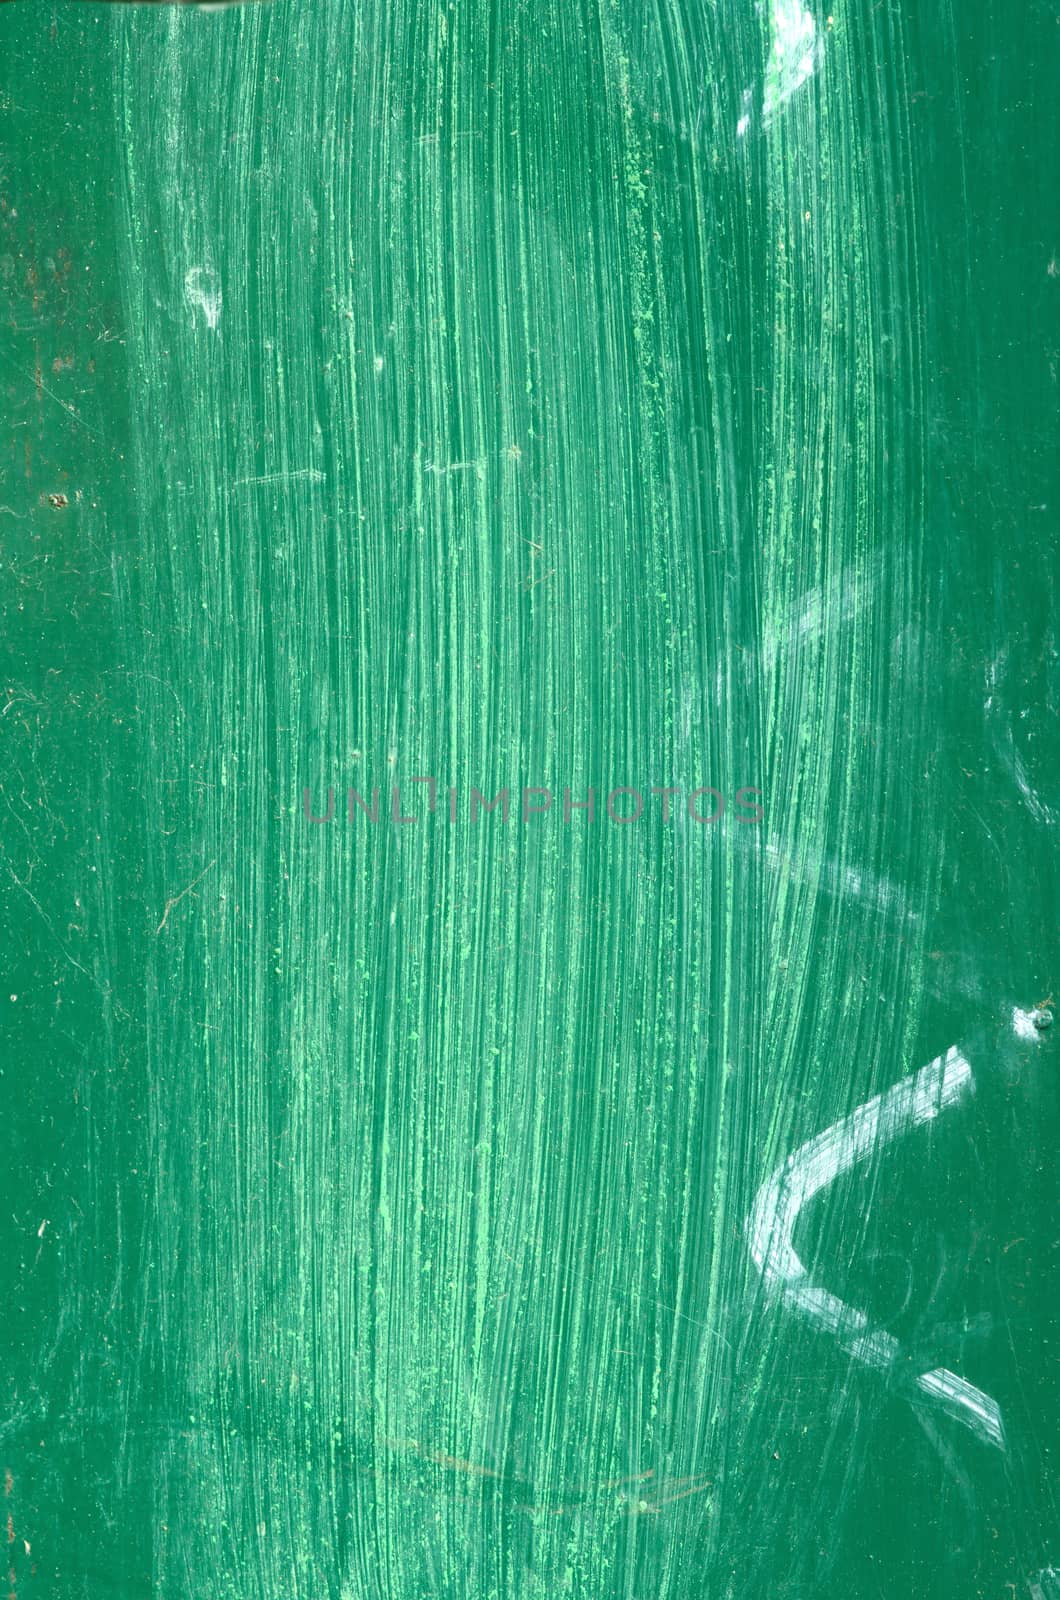 Green surface of metal plate with white lines.